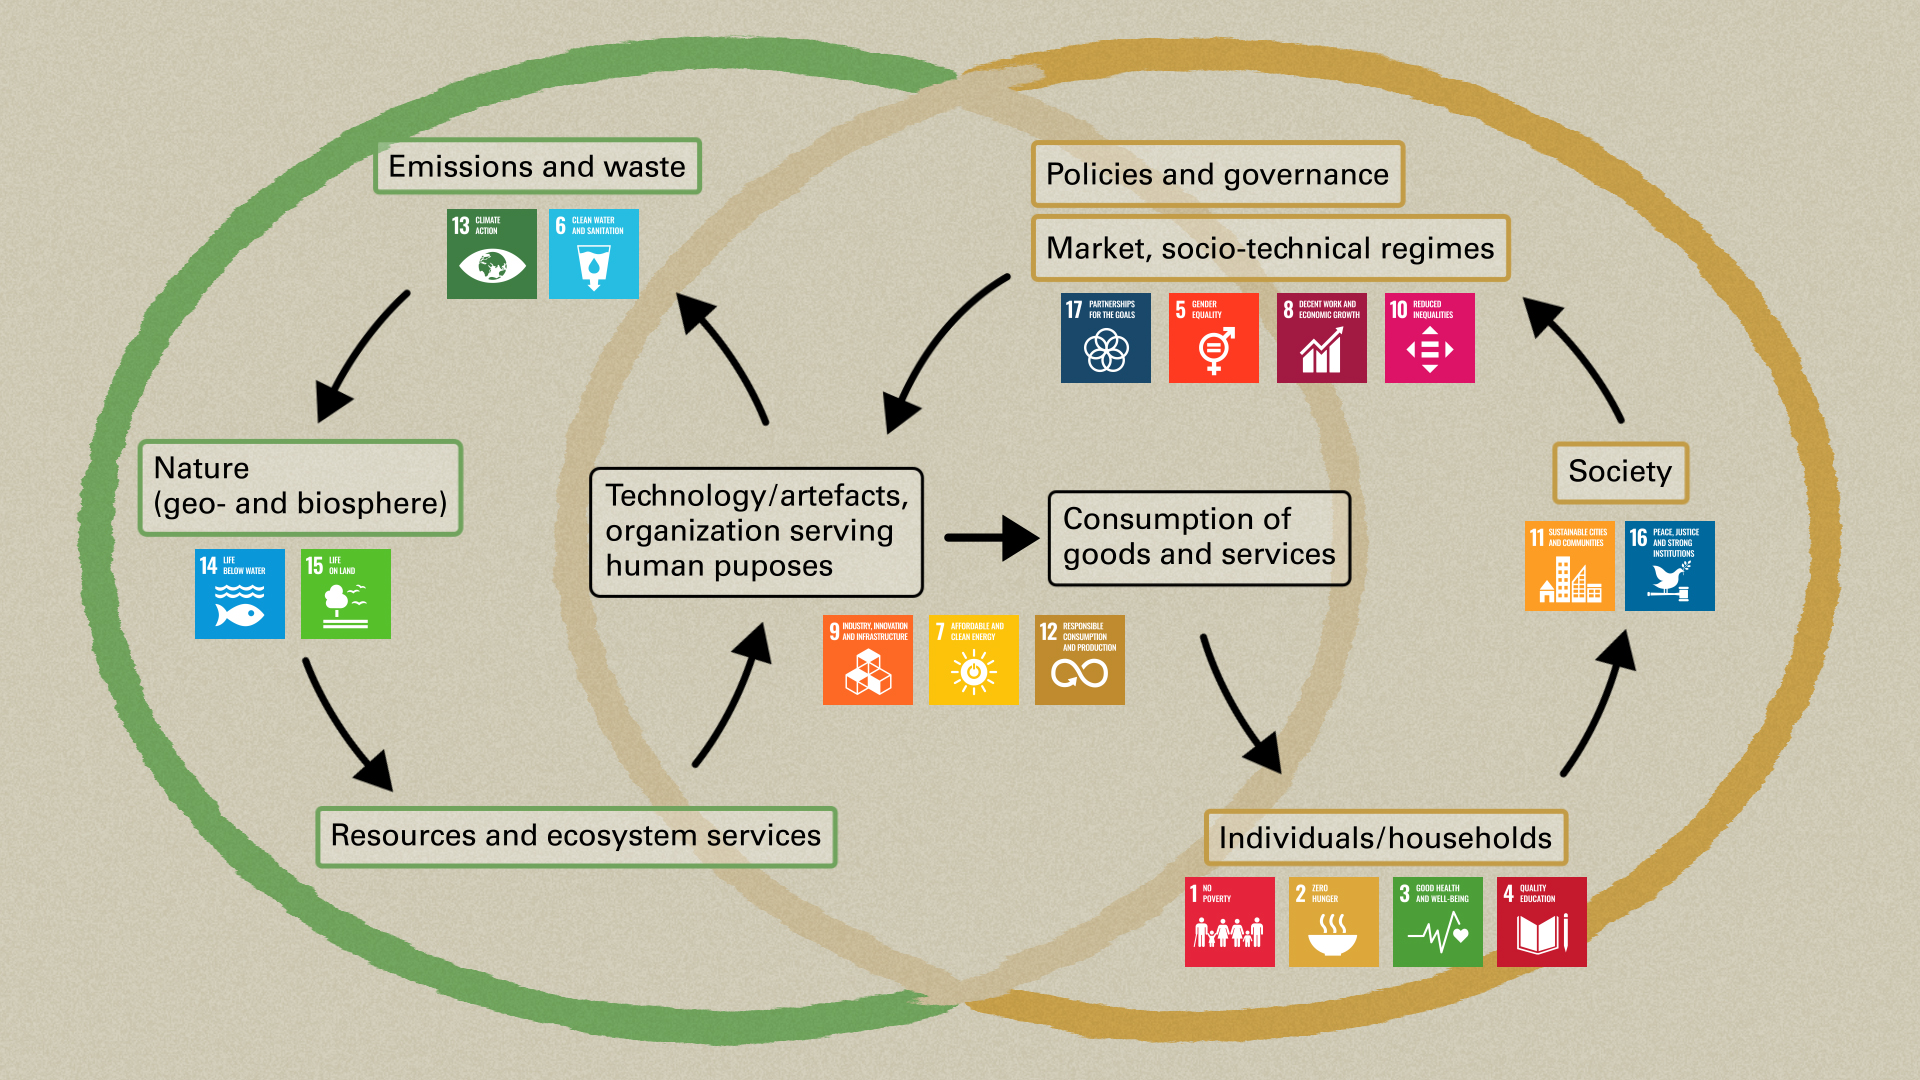 Diagram 2 shows the alignment of the 17 SDGs to the different functional elements to display the goals for the coupled human-nature system.